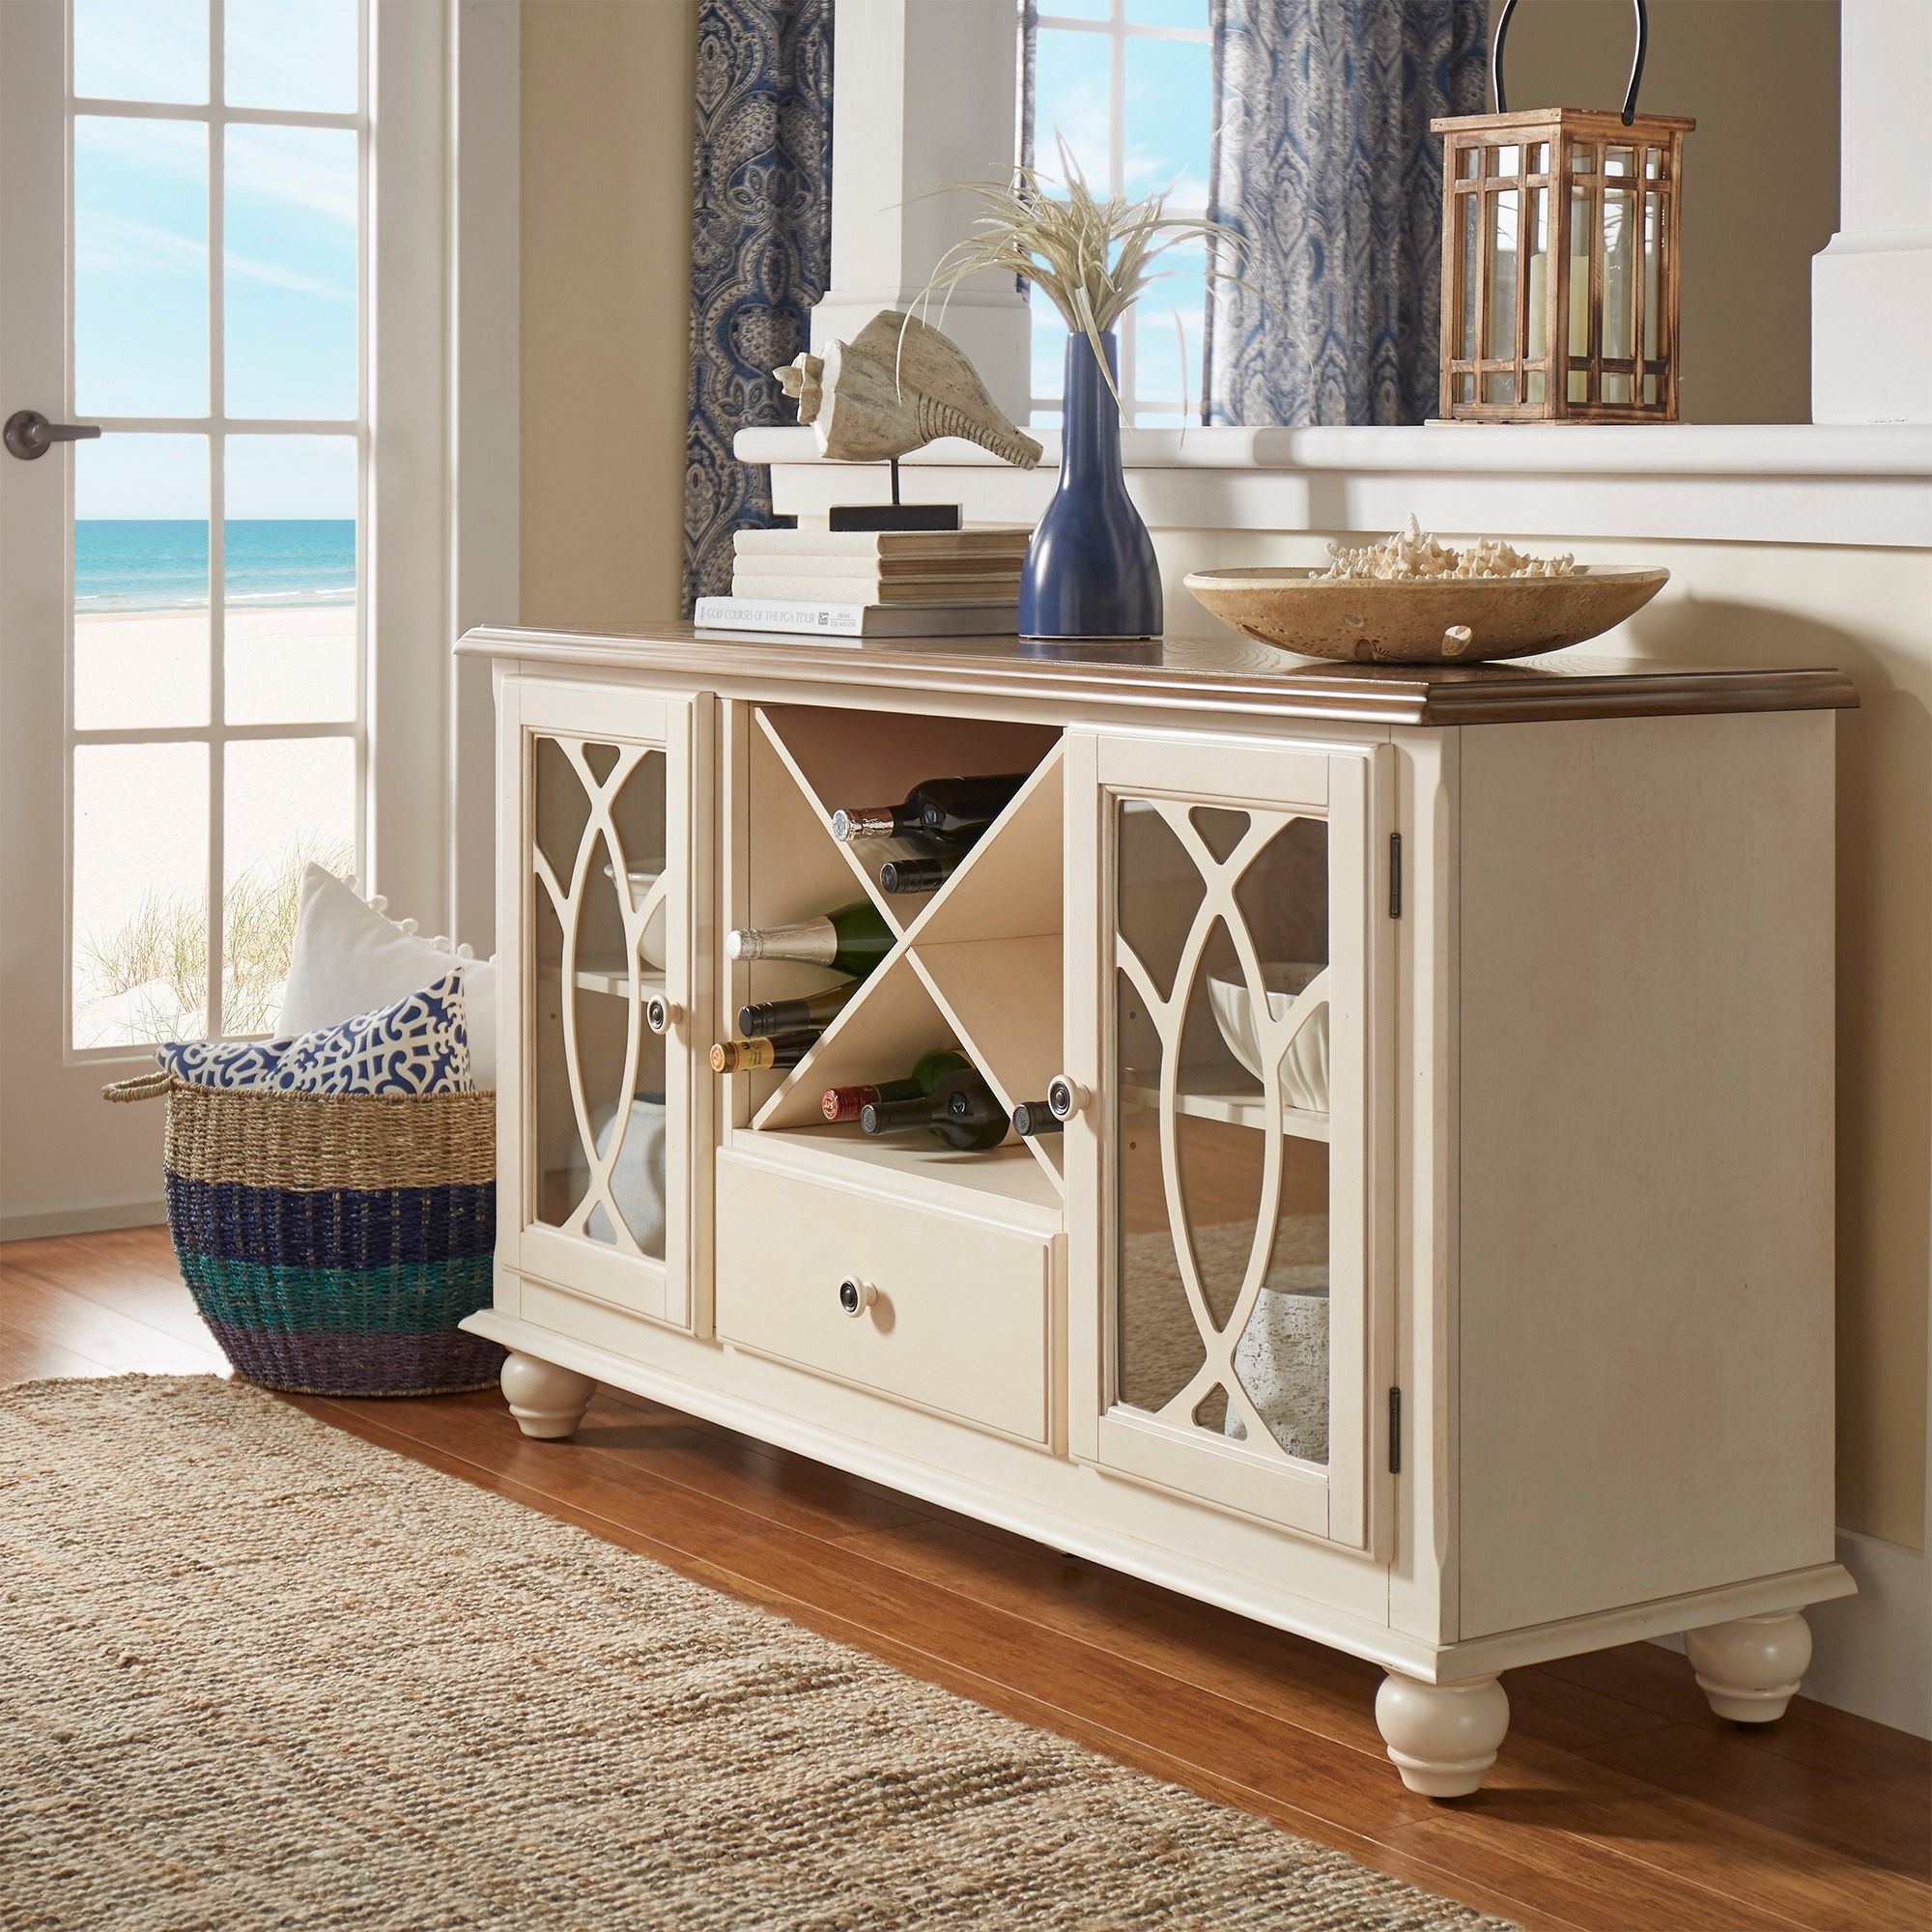 Tribecca Home Shayne Country Antique White Buffet Sideboard Regarding Tott And Eling Sideboards (View 25 of 30)